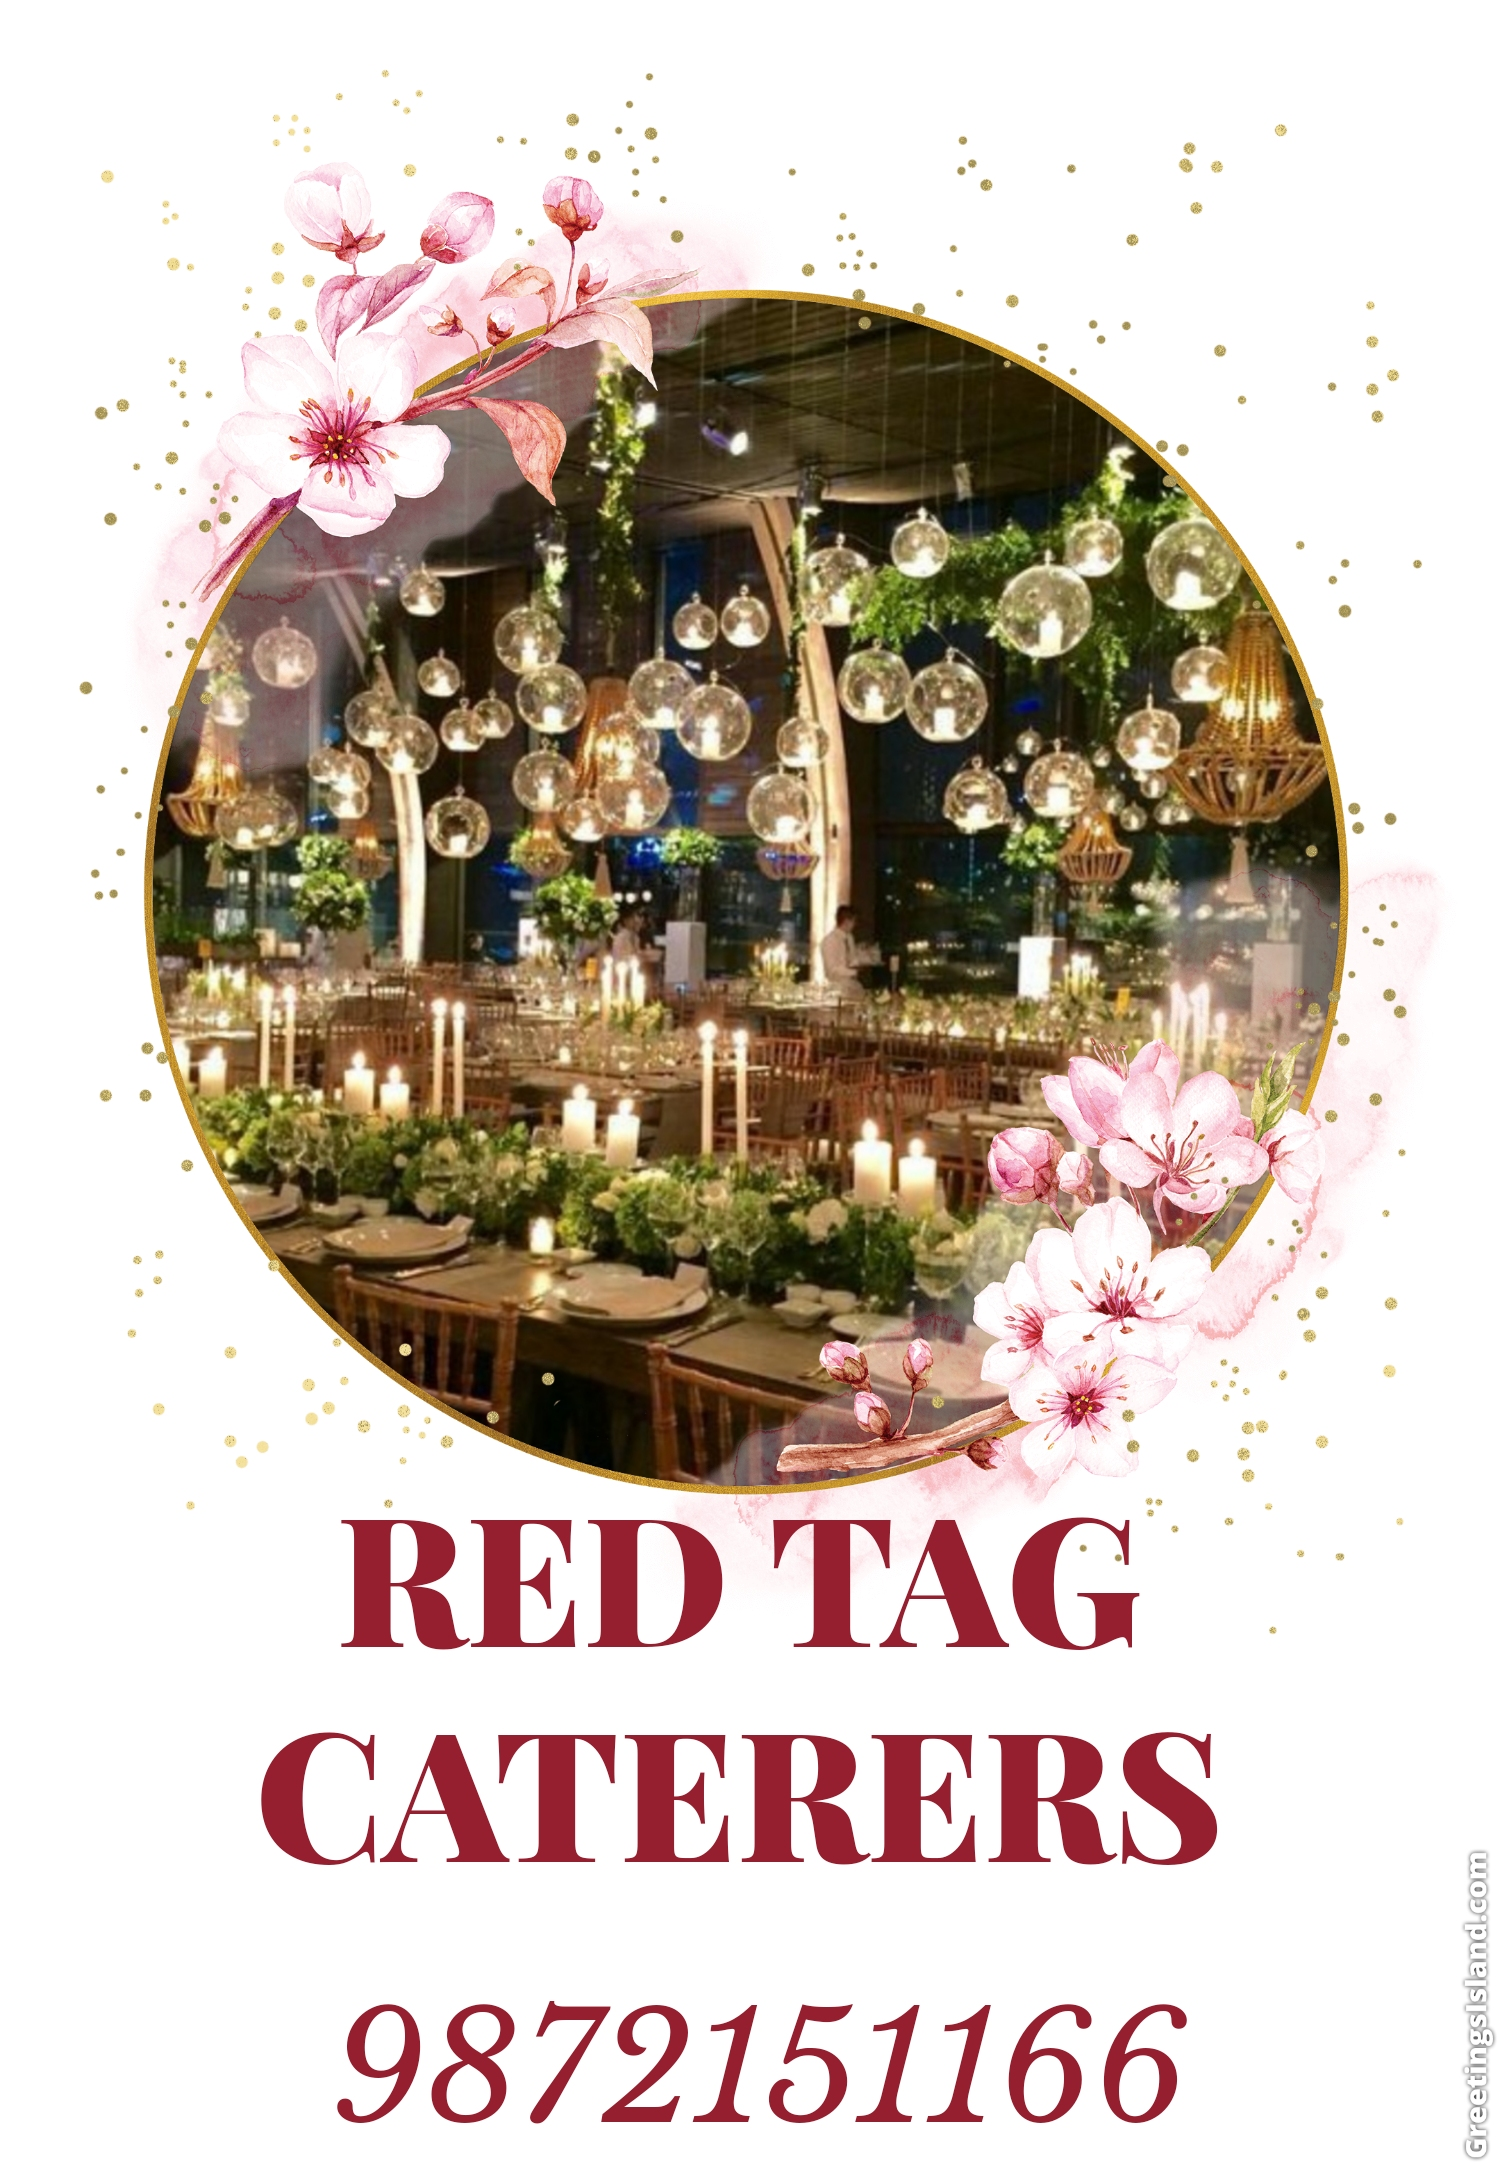 Best Leading catering service in panchkula and Mohali  | Red Tag Caterers | BEST CATERERS IN PANCHKULA,  BEST CATERING IN PANCHKULA, BEST WEDDING CATERERS IN PANCHKULA, BEST AFFORDABLE CATERING SERVICE IN PANCHKULA,  TOP 1 CATERERS IN PANCHKULA  - GL77425